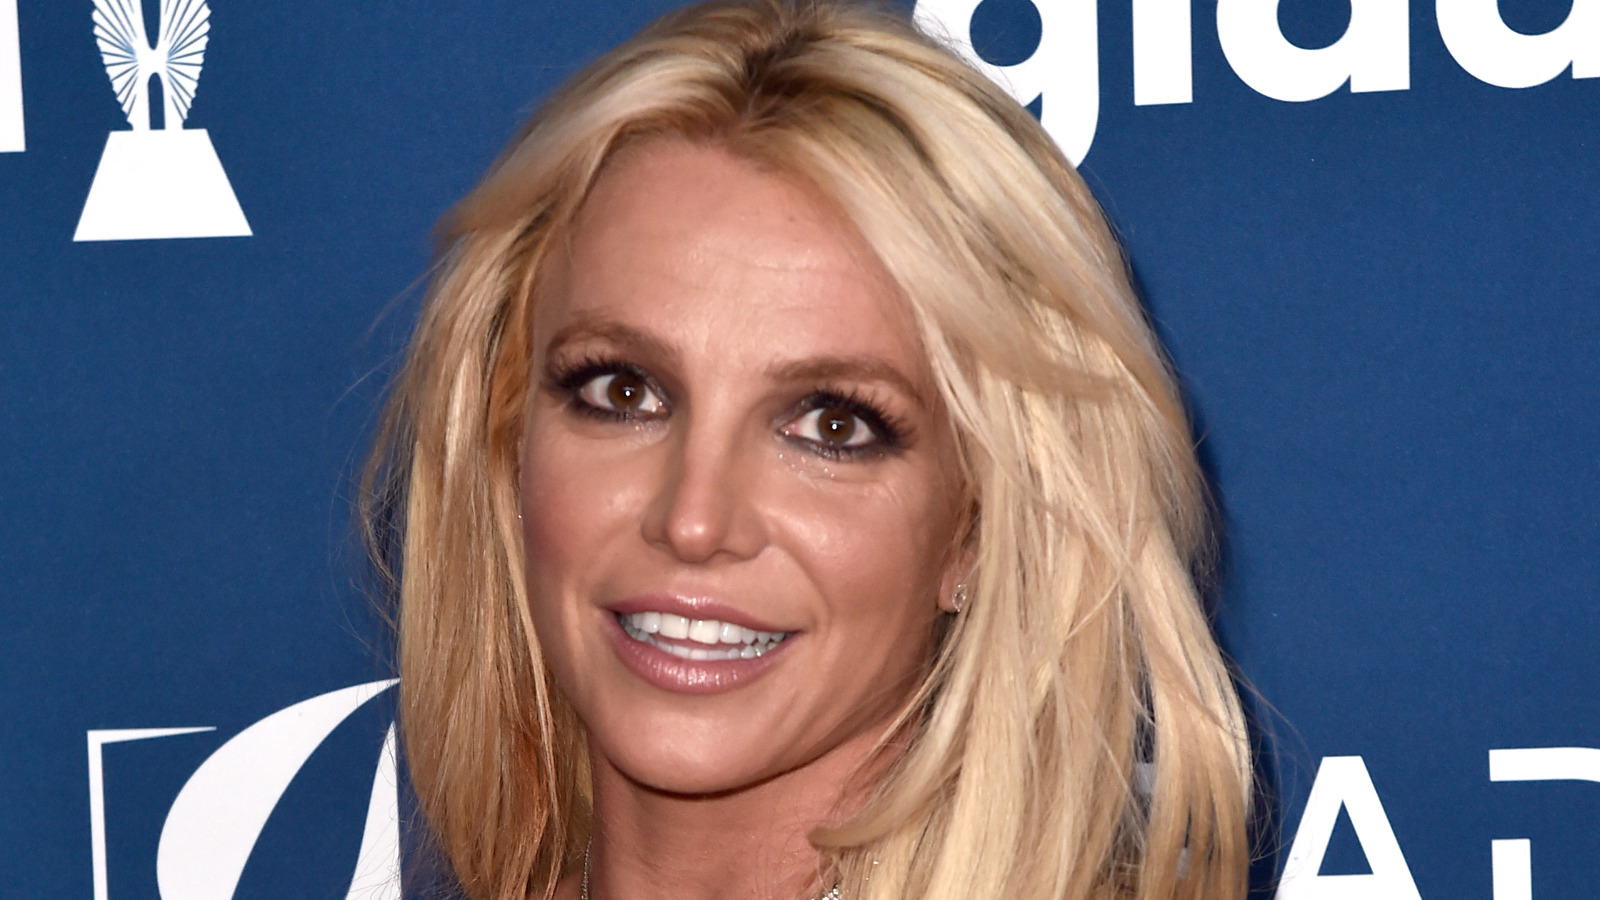 Why Britney Spears refuses to perform again